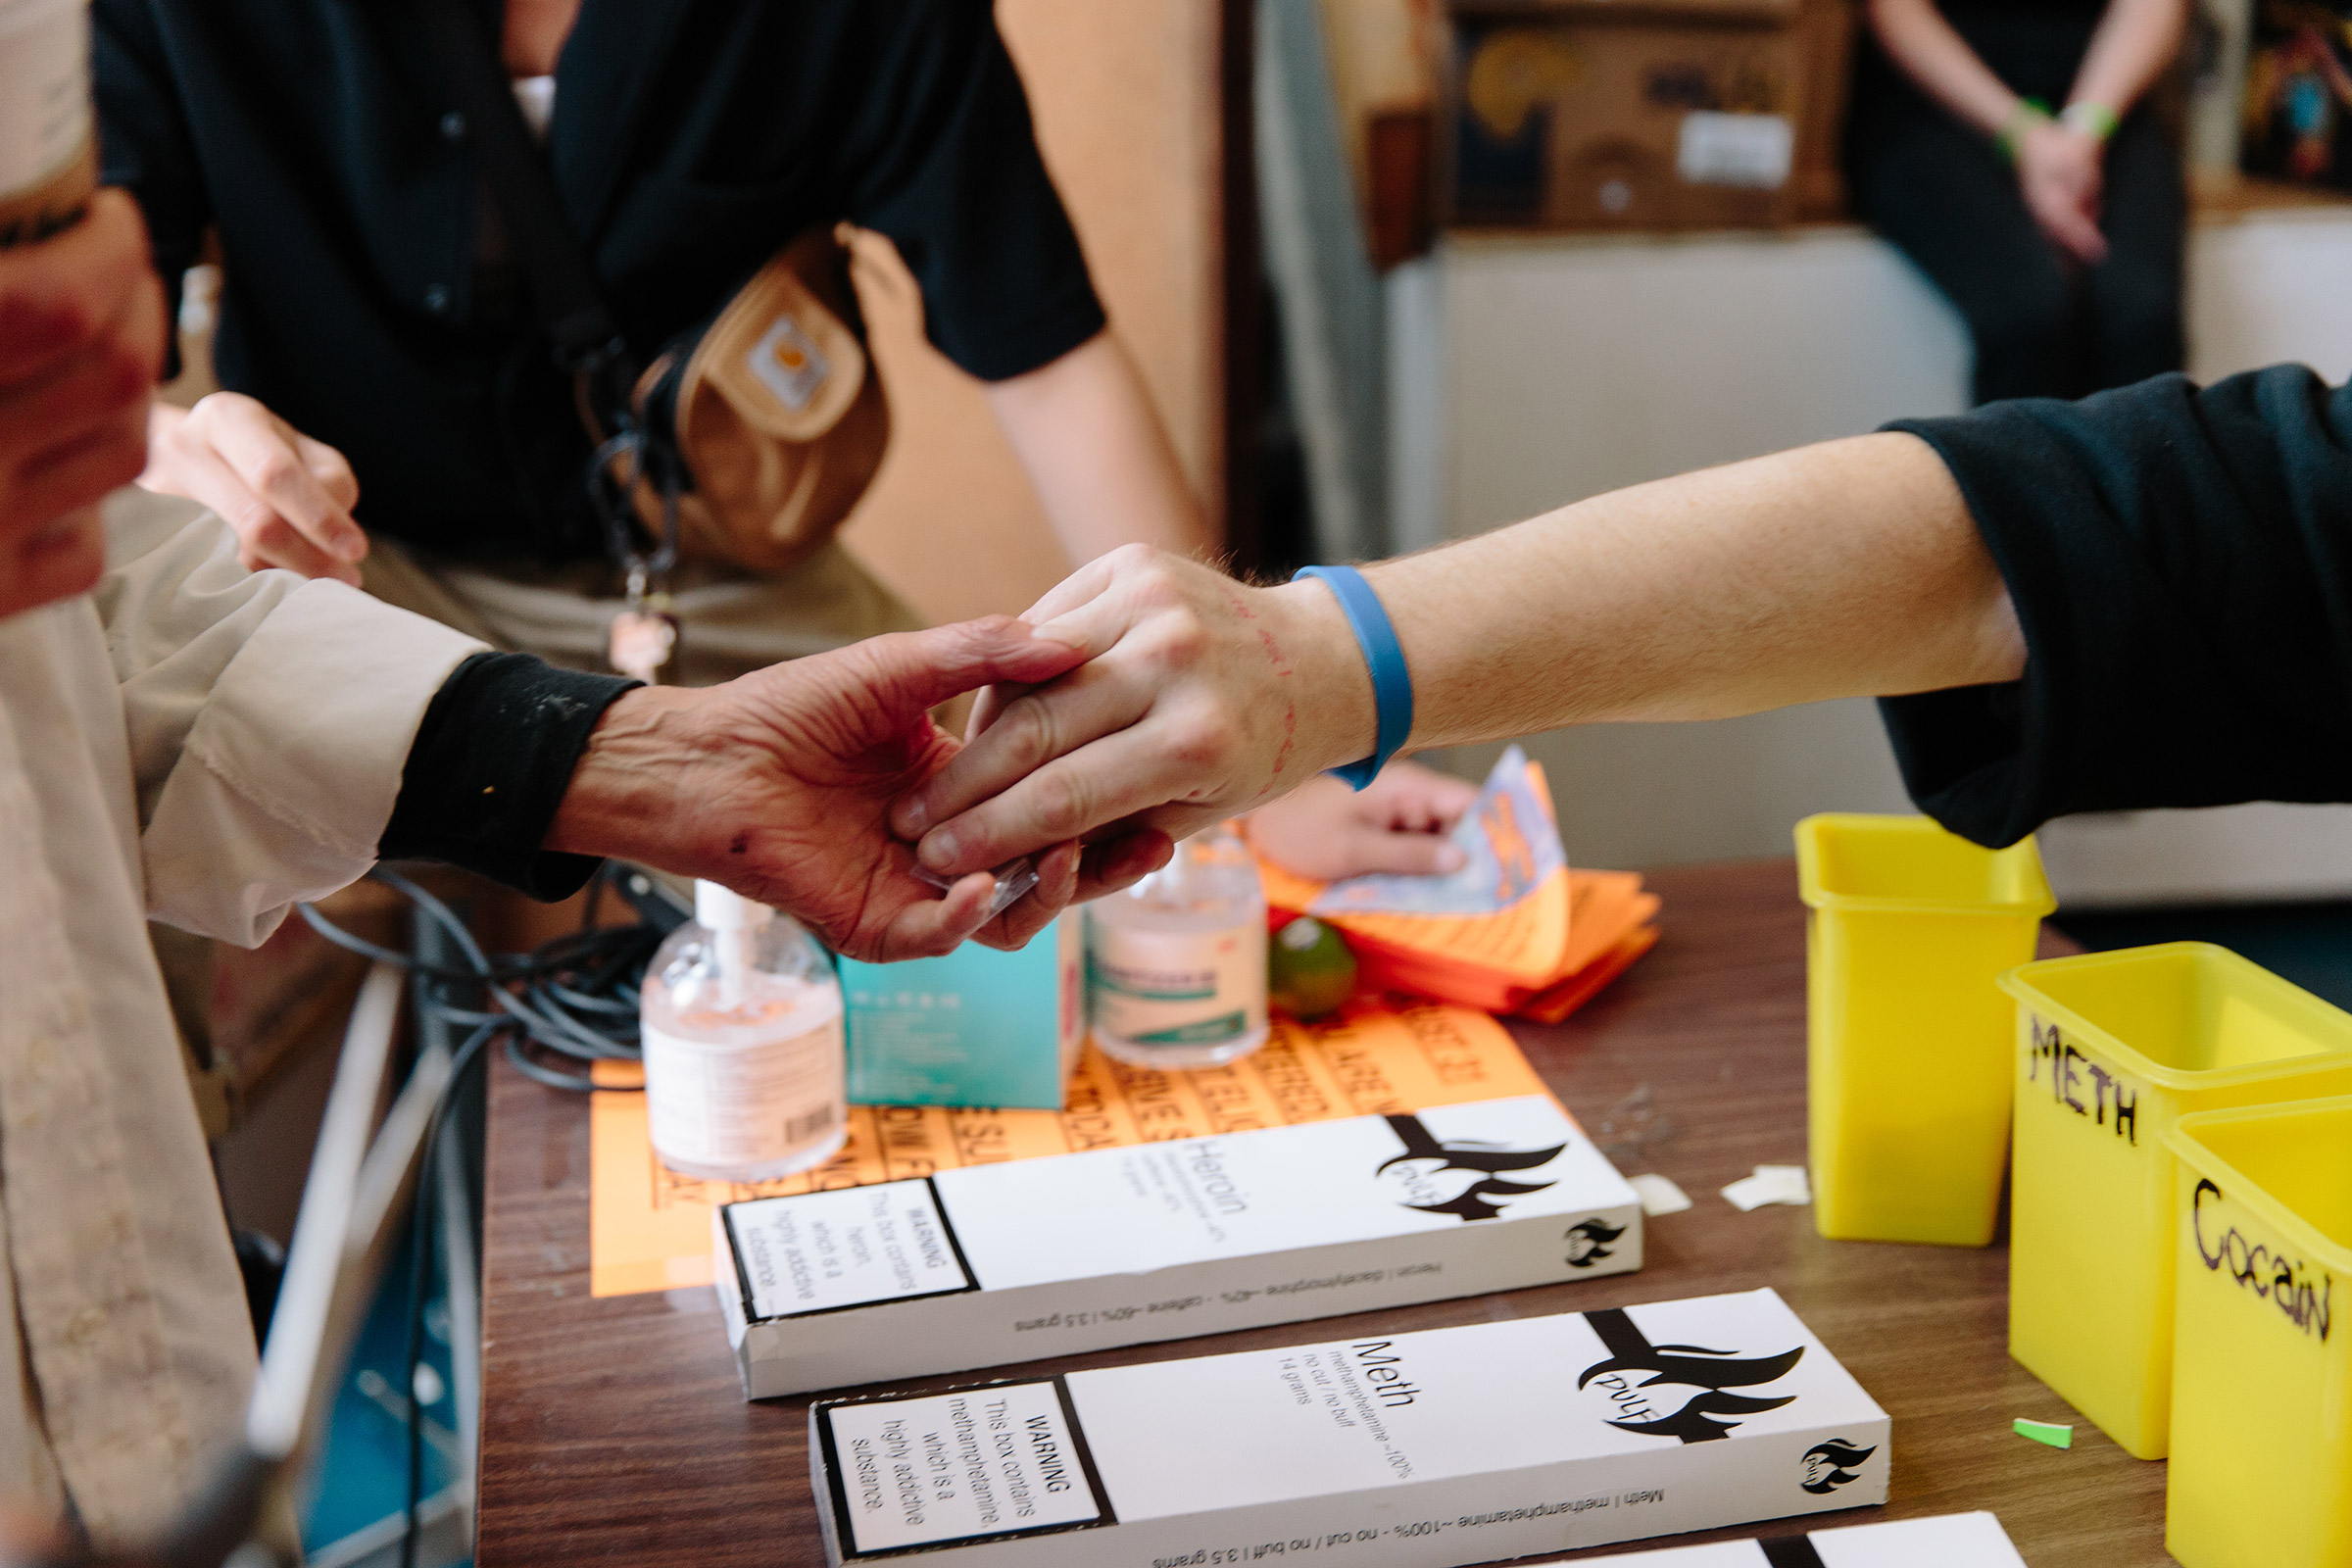 Free and tested heroin, methamphetamine, and cocaine are distributed on International Overdose Awareness Day by the Drug Users Liberation Front in Vancouver, B.C., on Aug. 31, 2021. (Photograph by Jackie Dives)